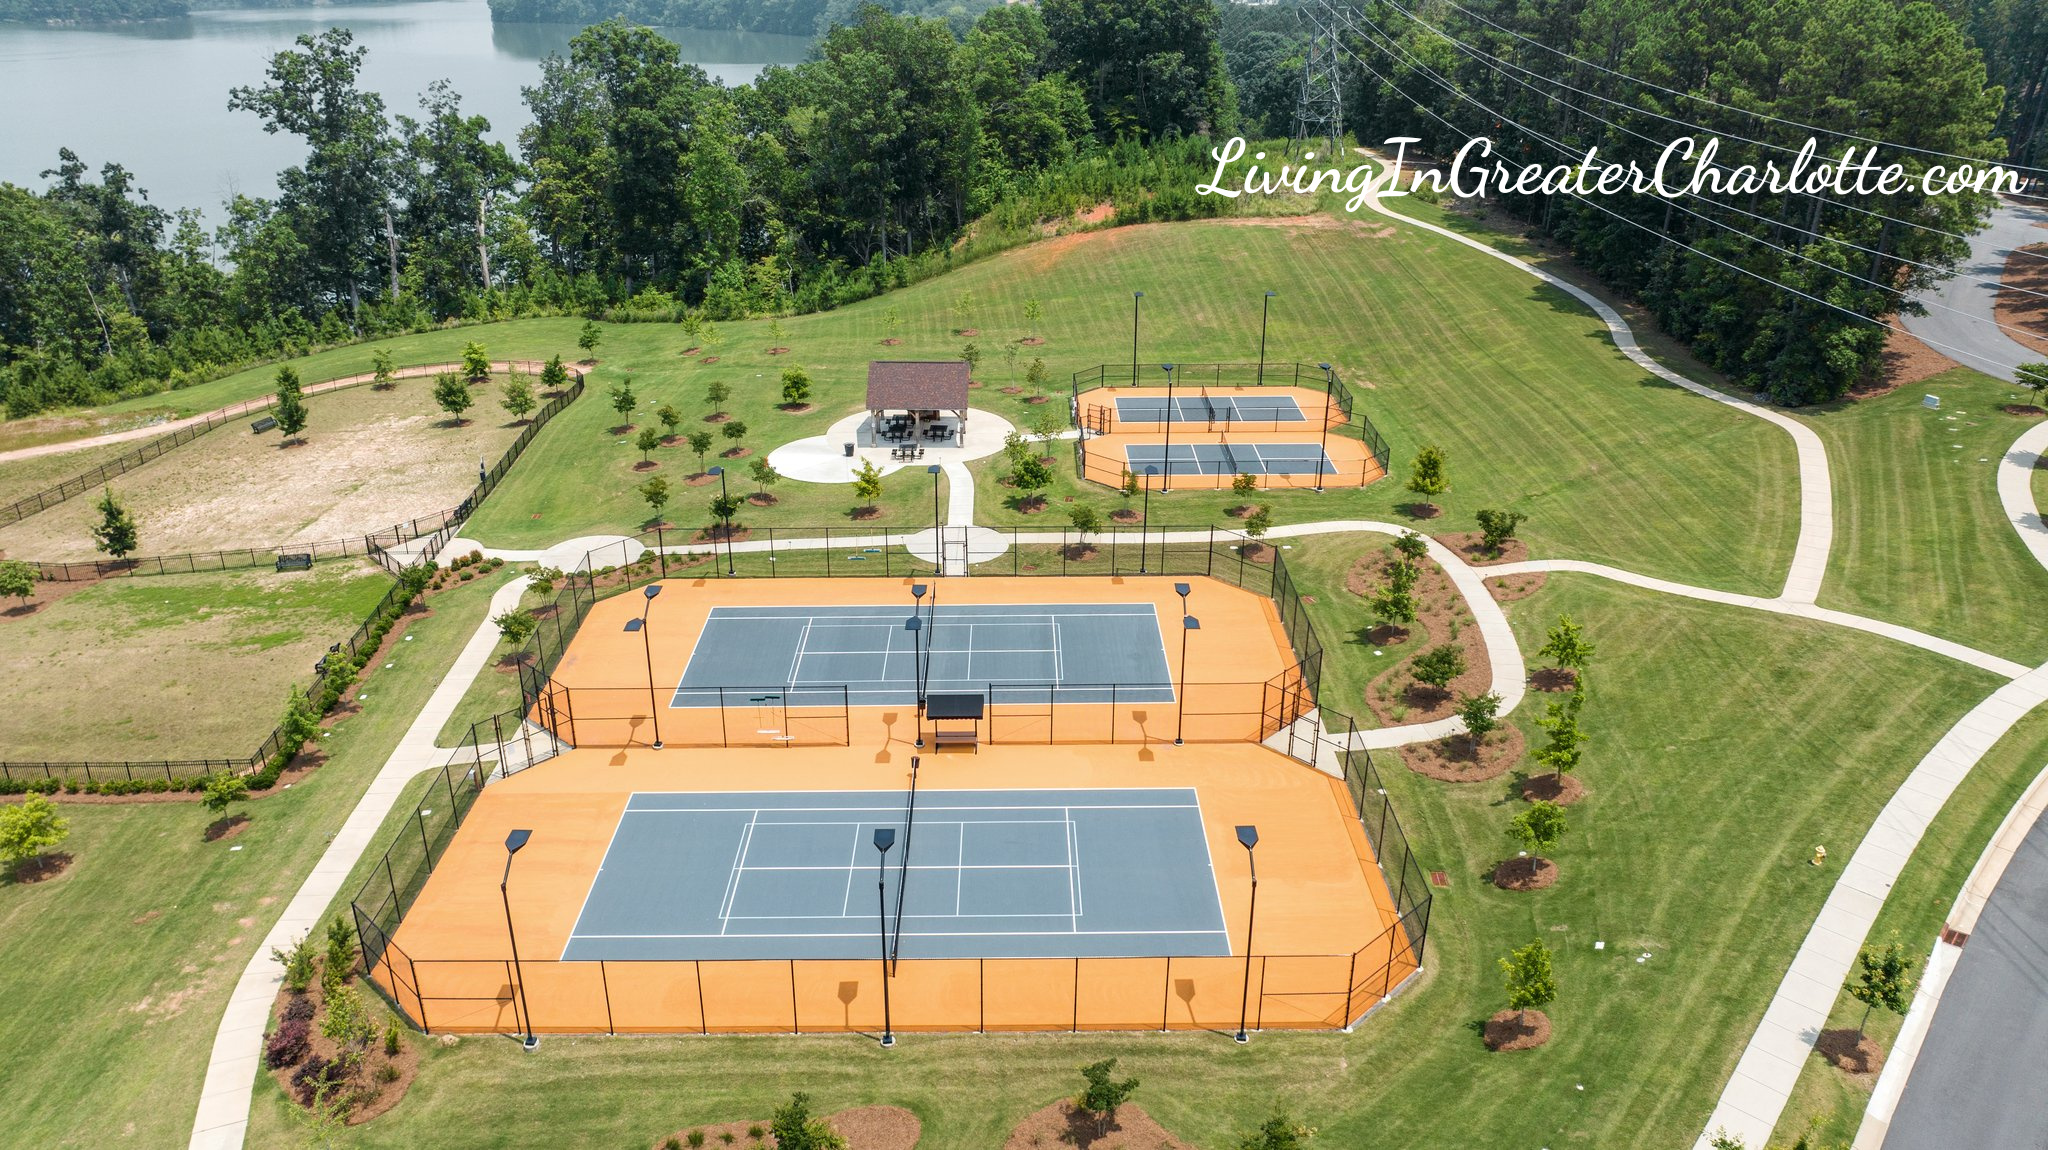 Imagery on Mountain Island Pickle Ball and Tennis Courts